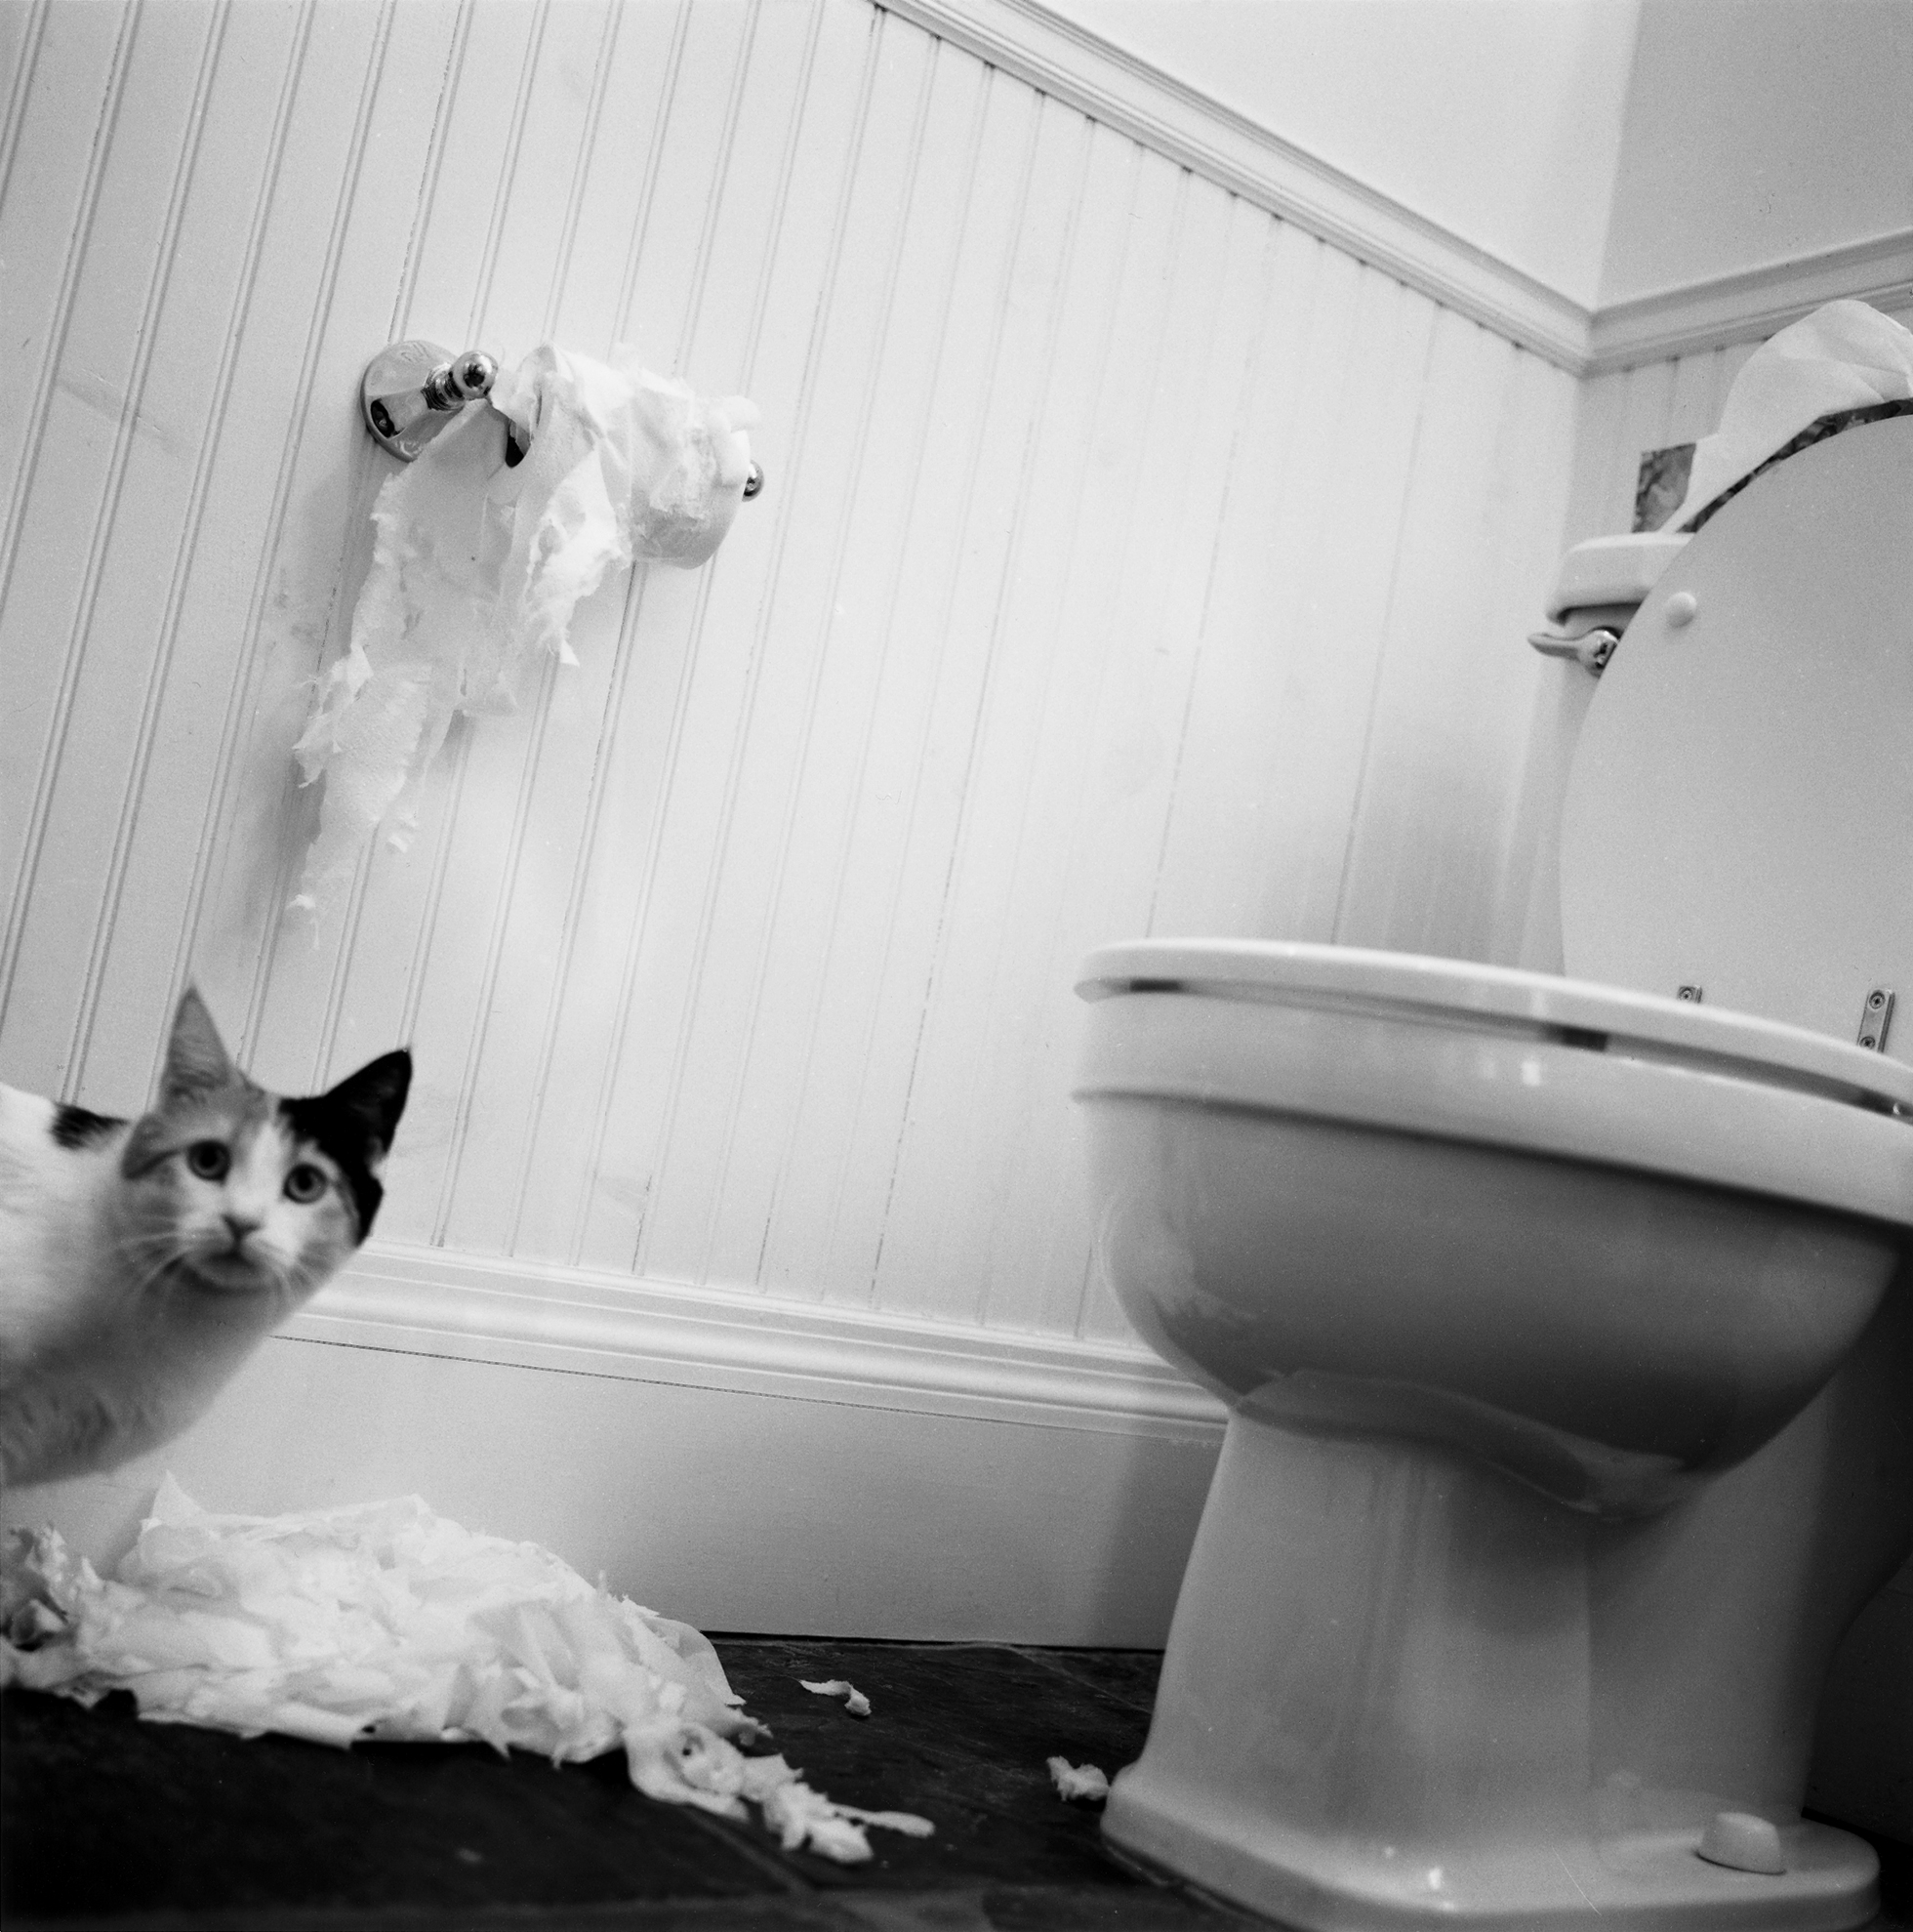 A cat standing in a bathroom and looking at the camera next to a pile of shredded toilet paper. The toilet paper on a holder attached to the wall above is also shredded.